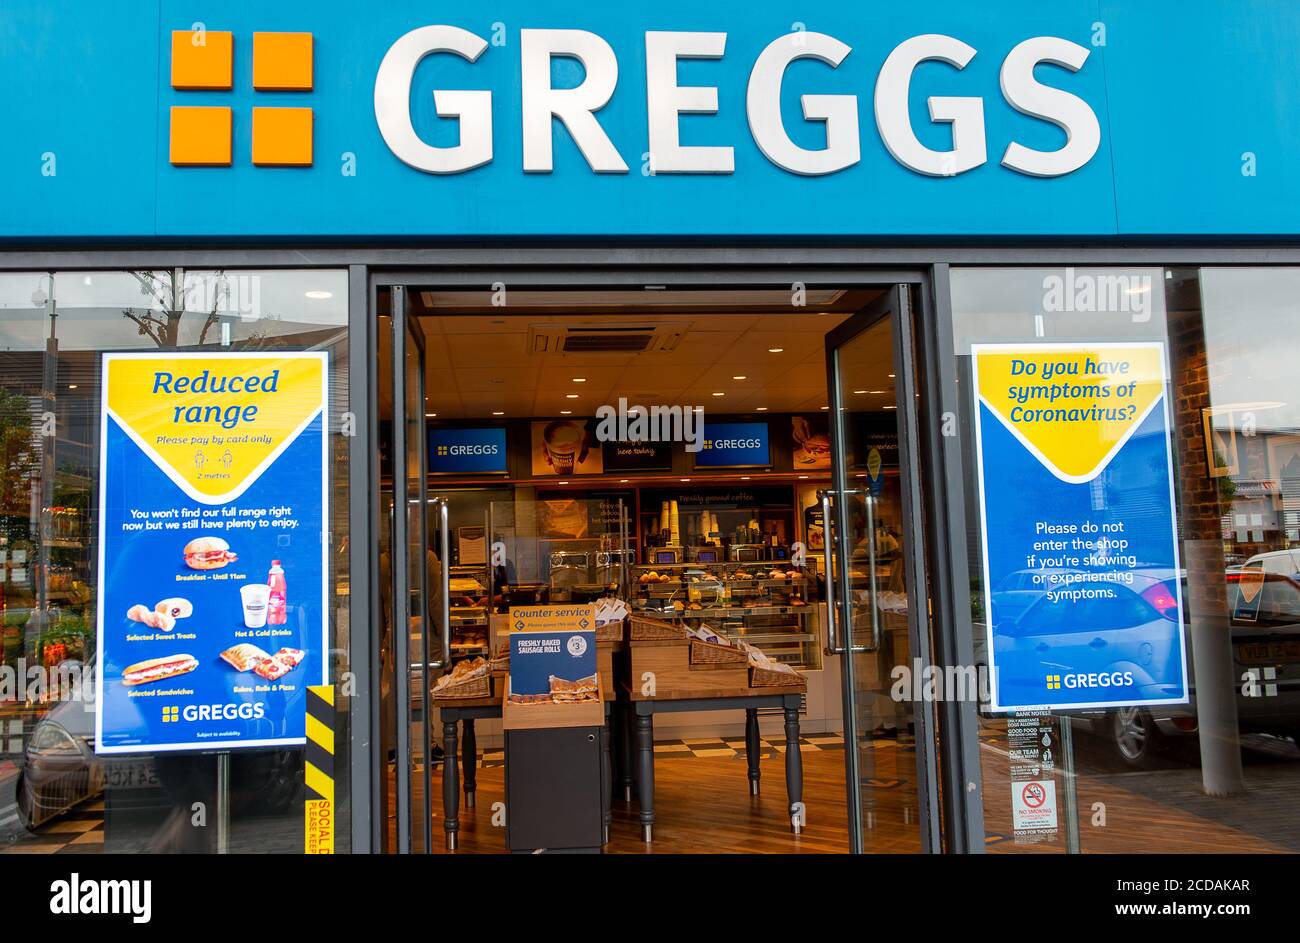 Slough, Berkshire, UK. 18th June, 2020. The Greggs bakers shop on Slough Trading Estate in Berkshire reopened today following the easing of the Coronavirus Covid-19 Pandemic lockdown. A maximum of 5 customers are allowed in at any one time and the opening hours are reduced as well as the range on offer. Credit: Maureen McLean/Alamy Stock Photo